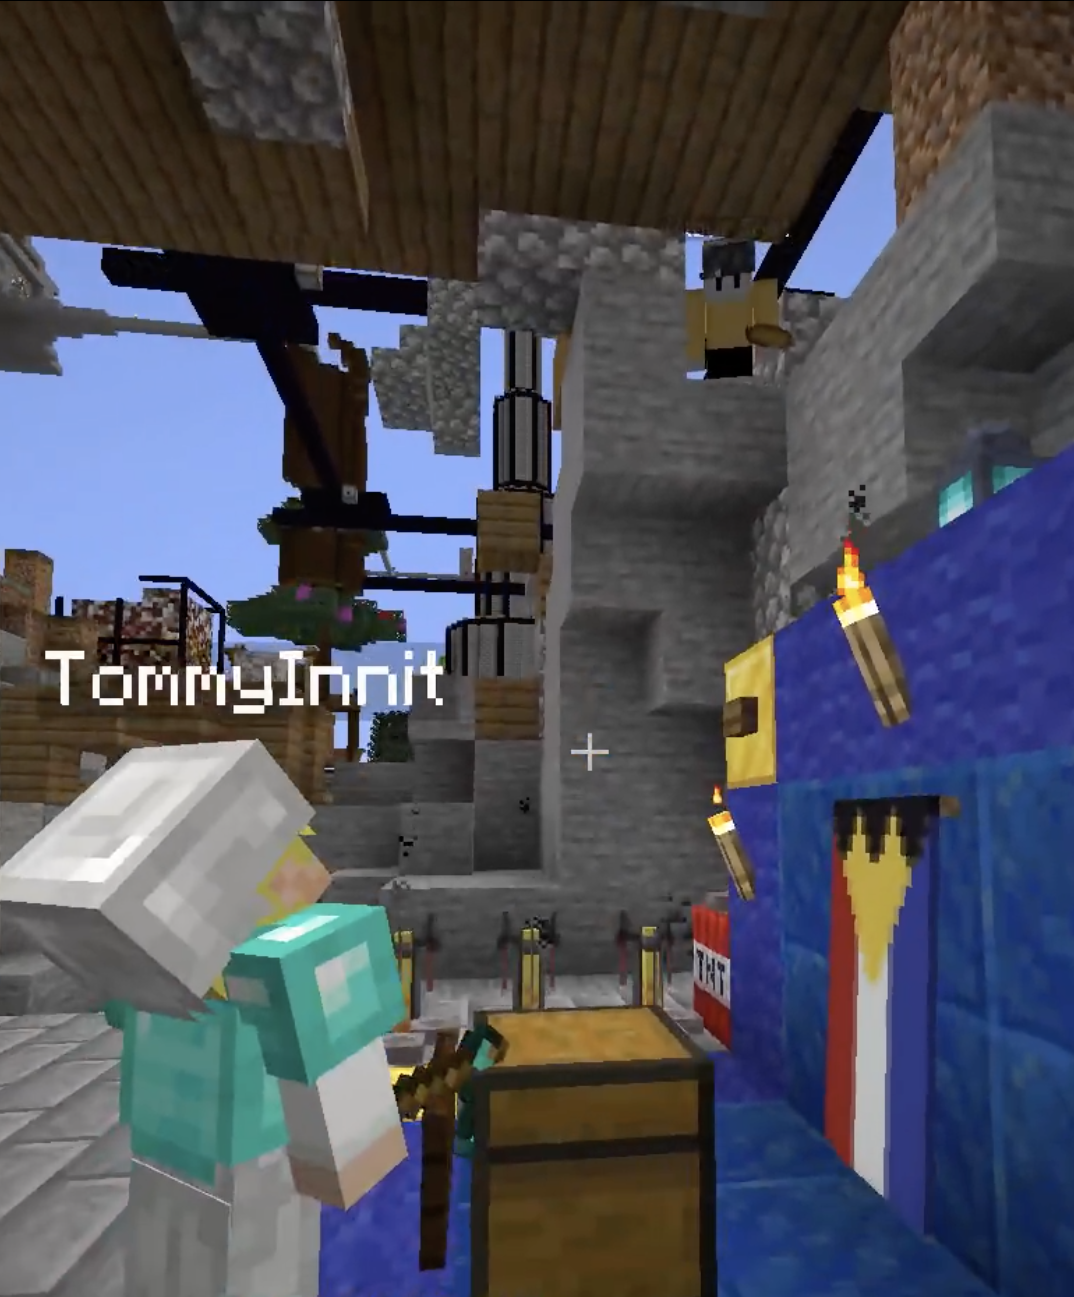 Minecraft Streamer TommyInnit's latest meet-up with Tubbo, Ranboo